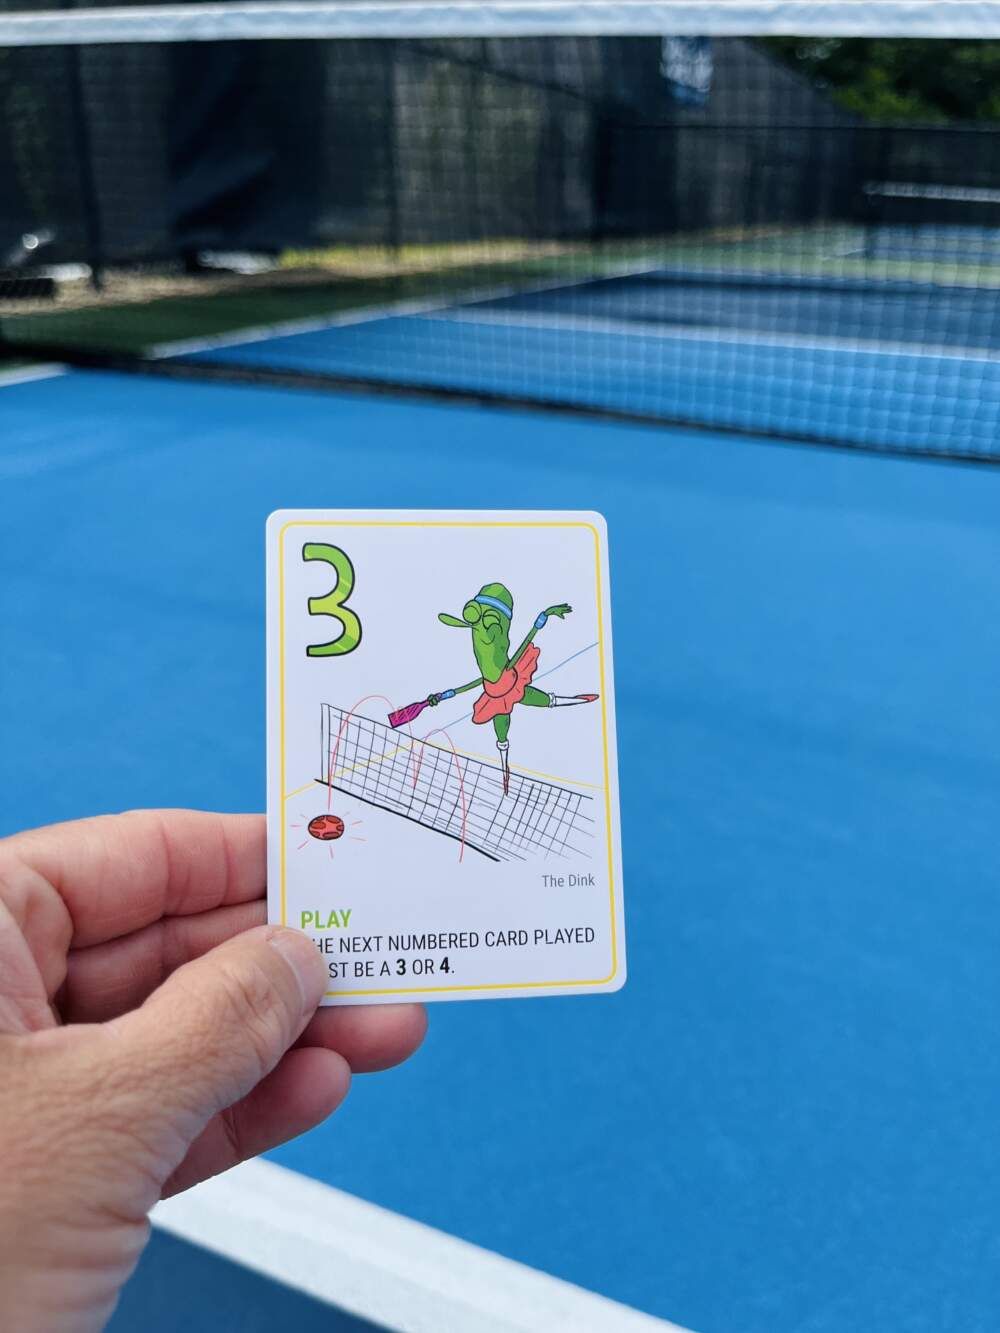 The Association of Pickleball Professionals says 48.3 million adults have joined the crazy. (Courtesy of Marcella Meyer)